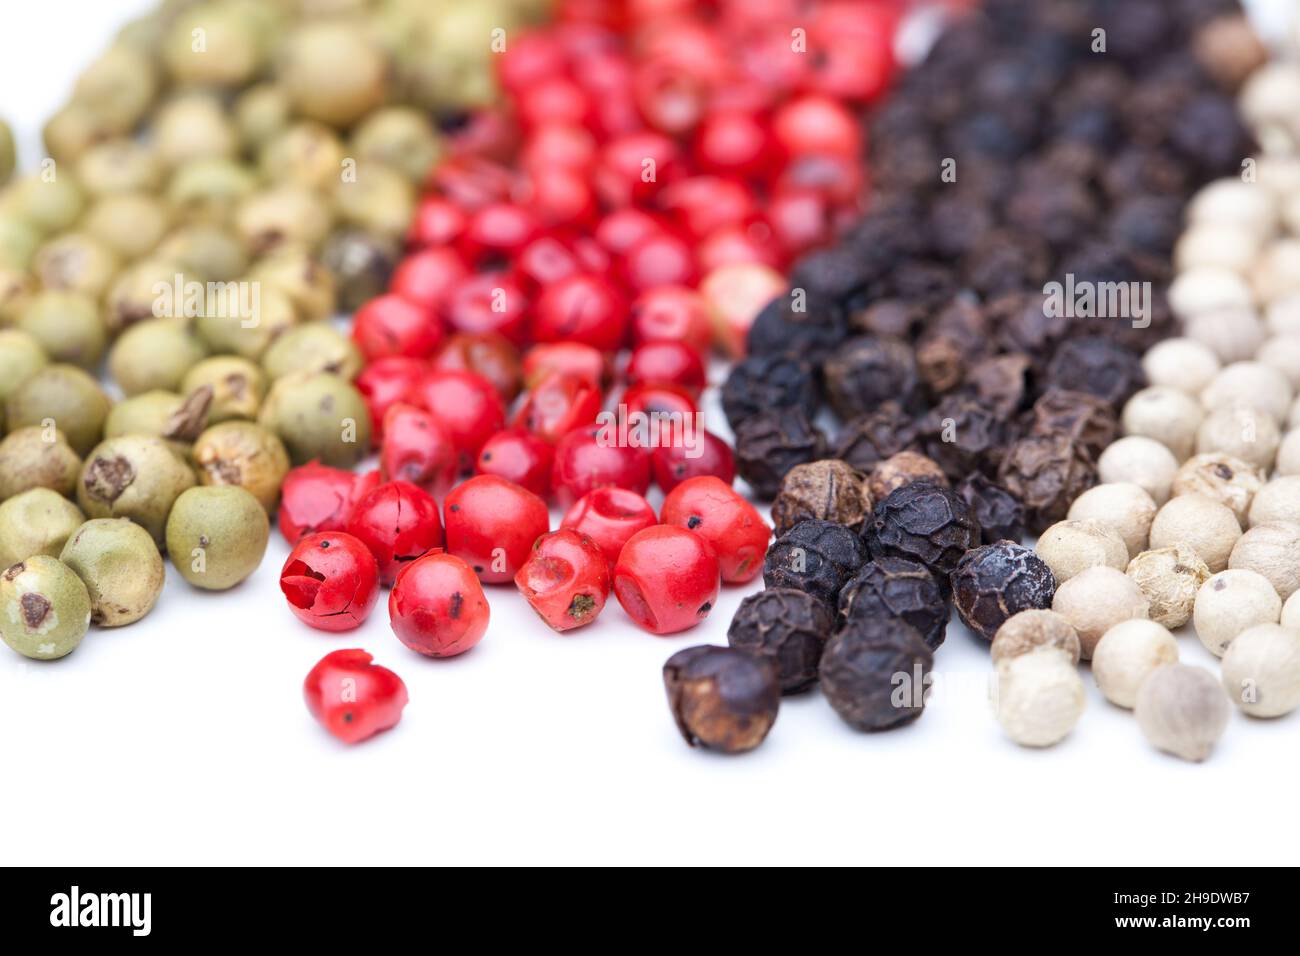 pepper, colorful, different, peppercorns, whole, some, black, white, red, pink, side by side, details, together, line, trace, green, background, close Stock Photo